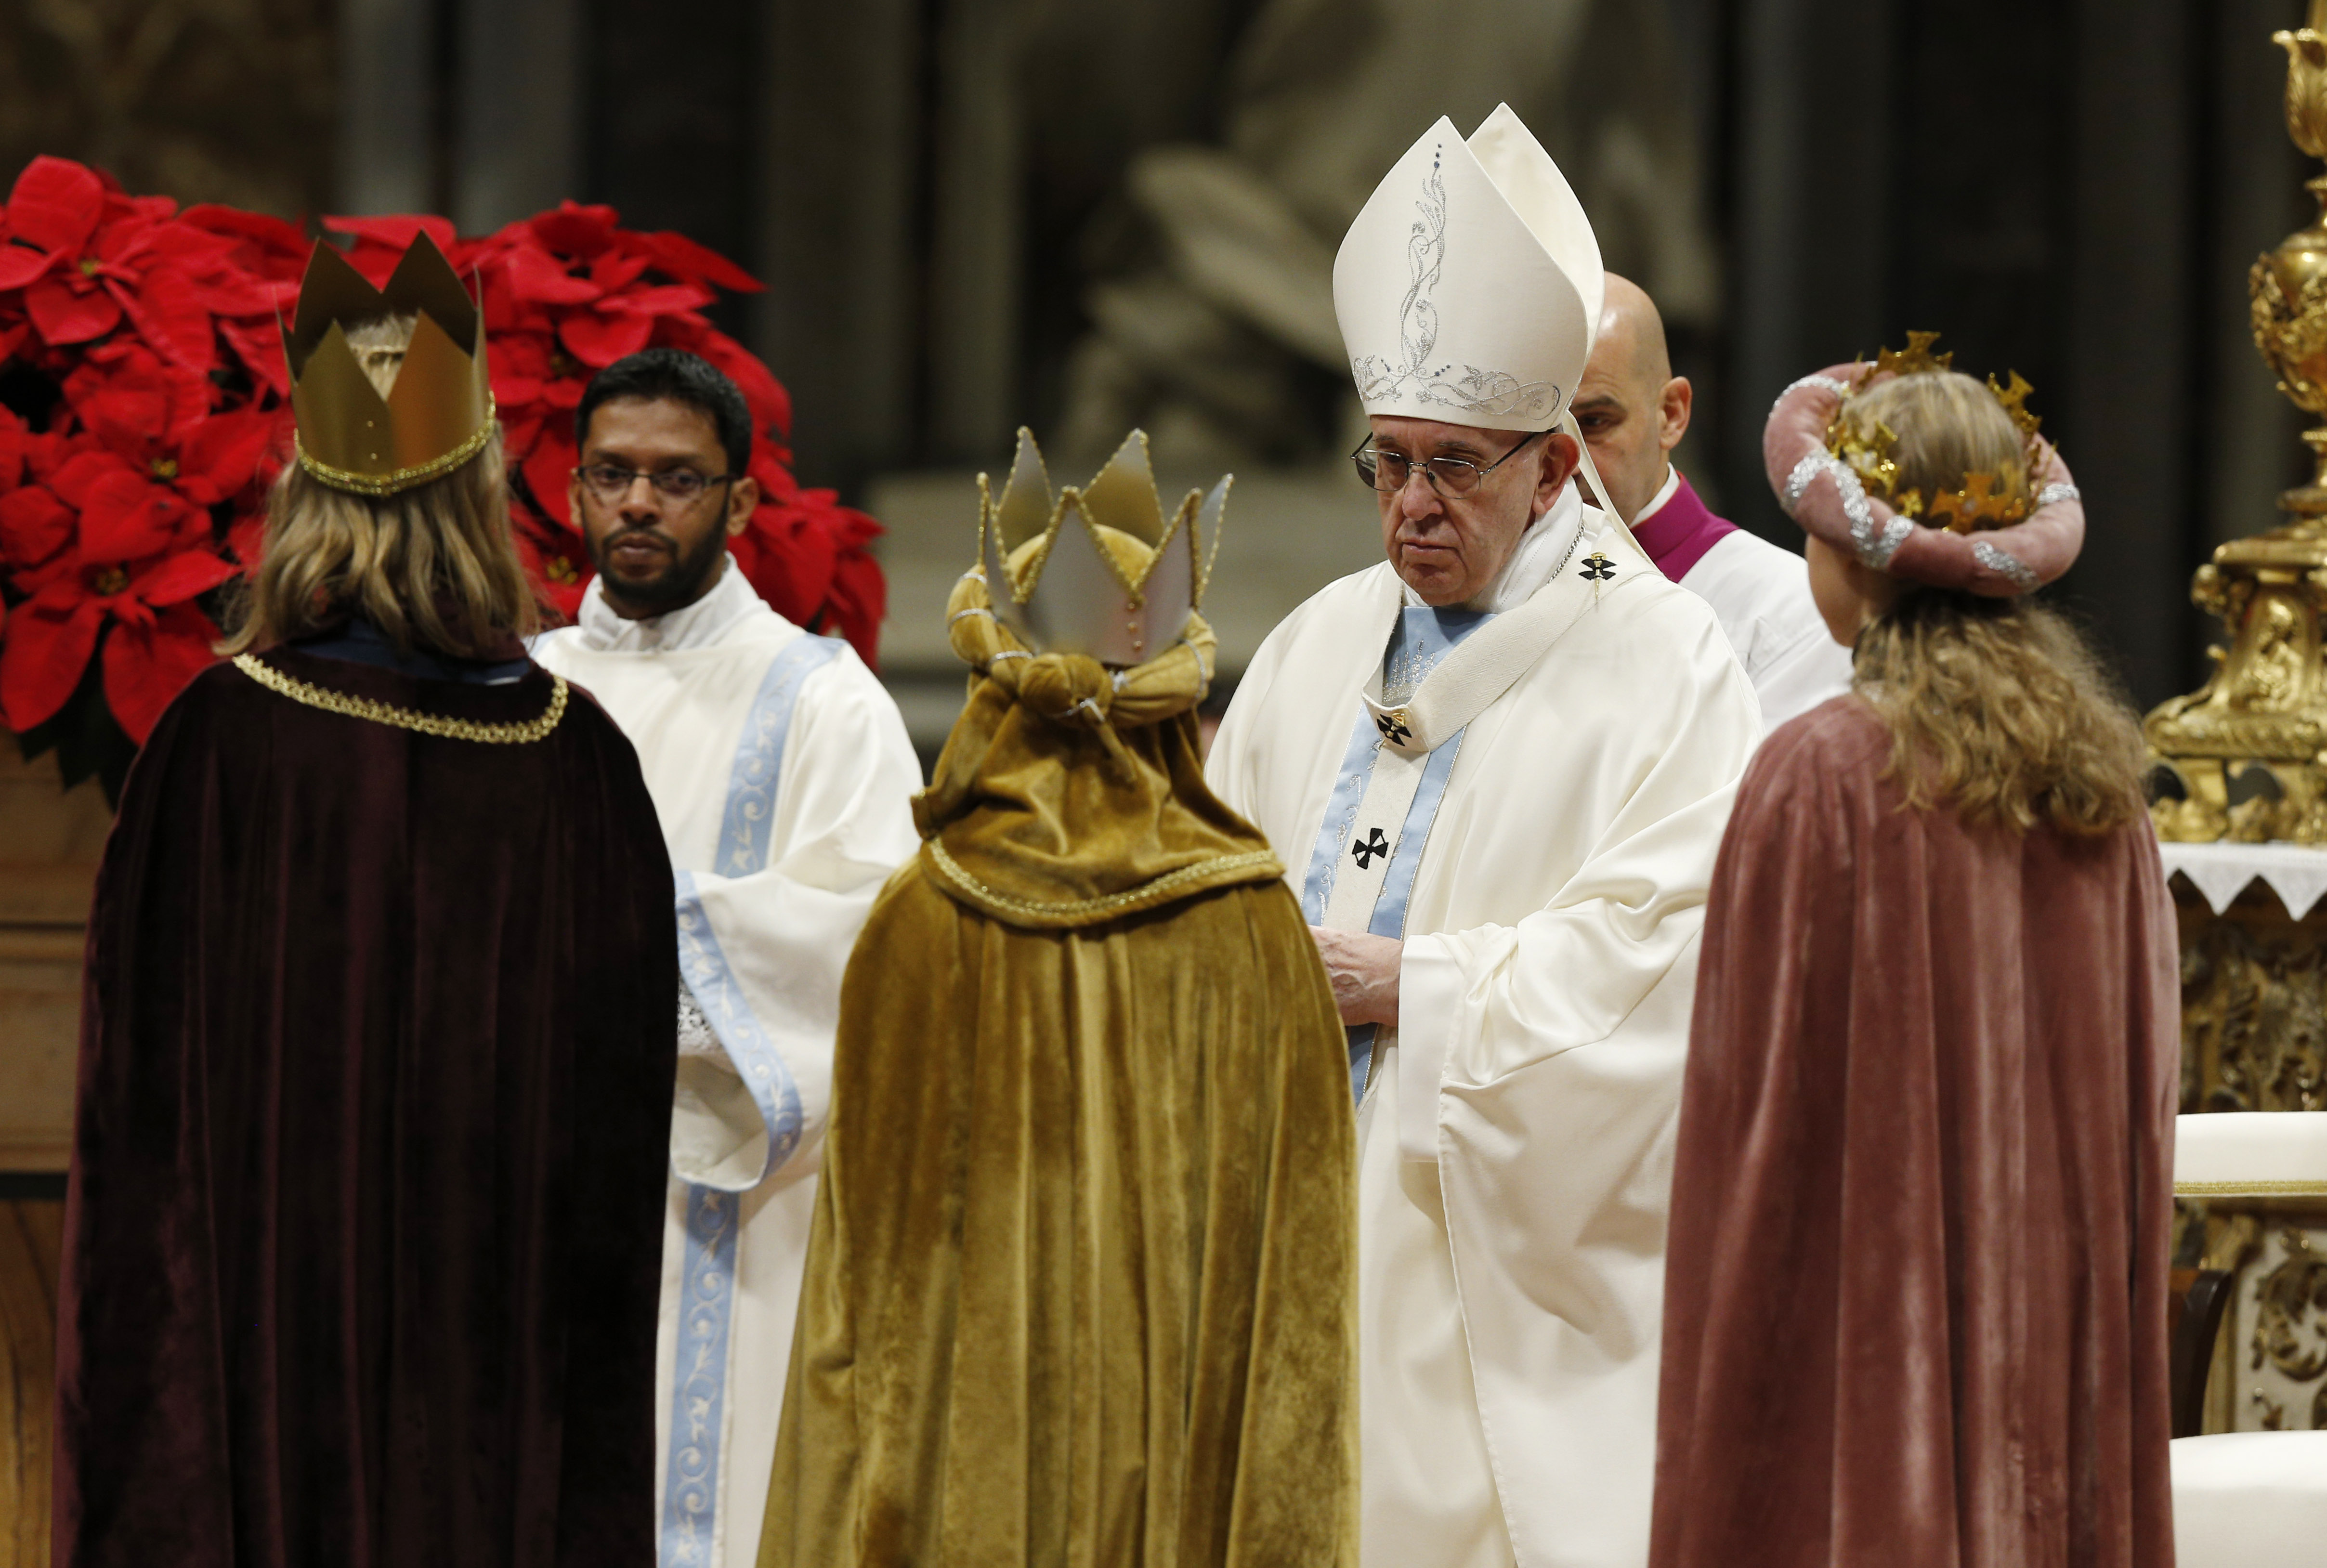 Pope prays for new year marked by tenderness and peace